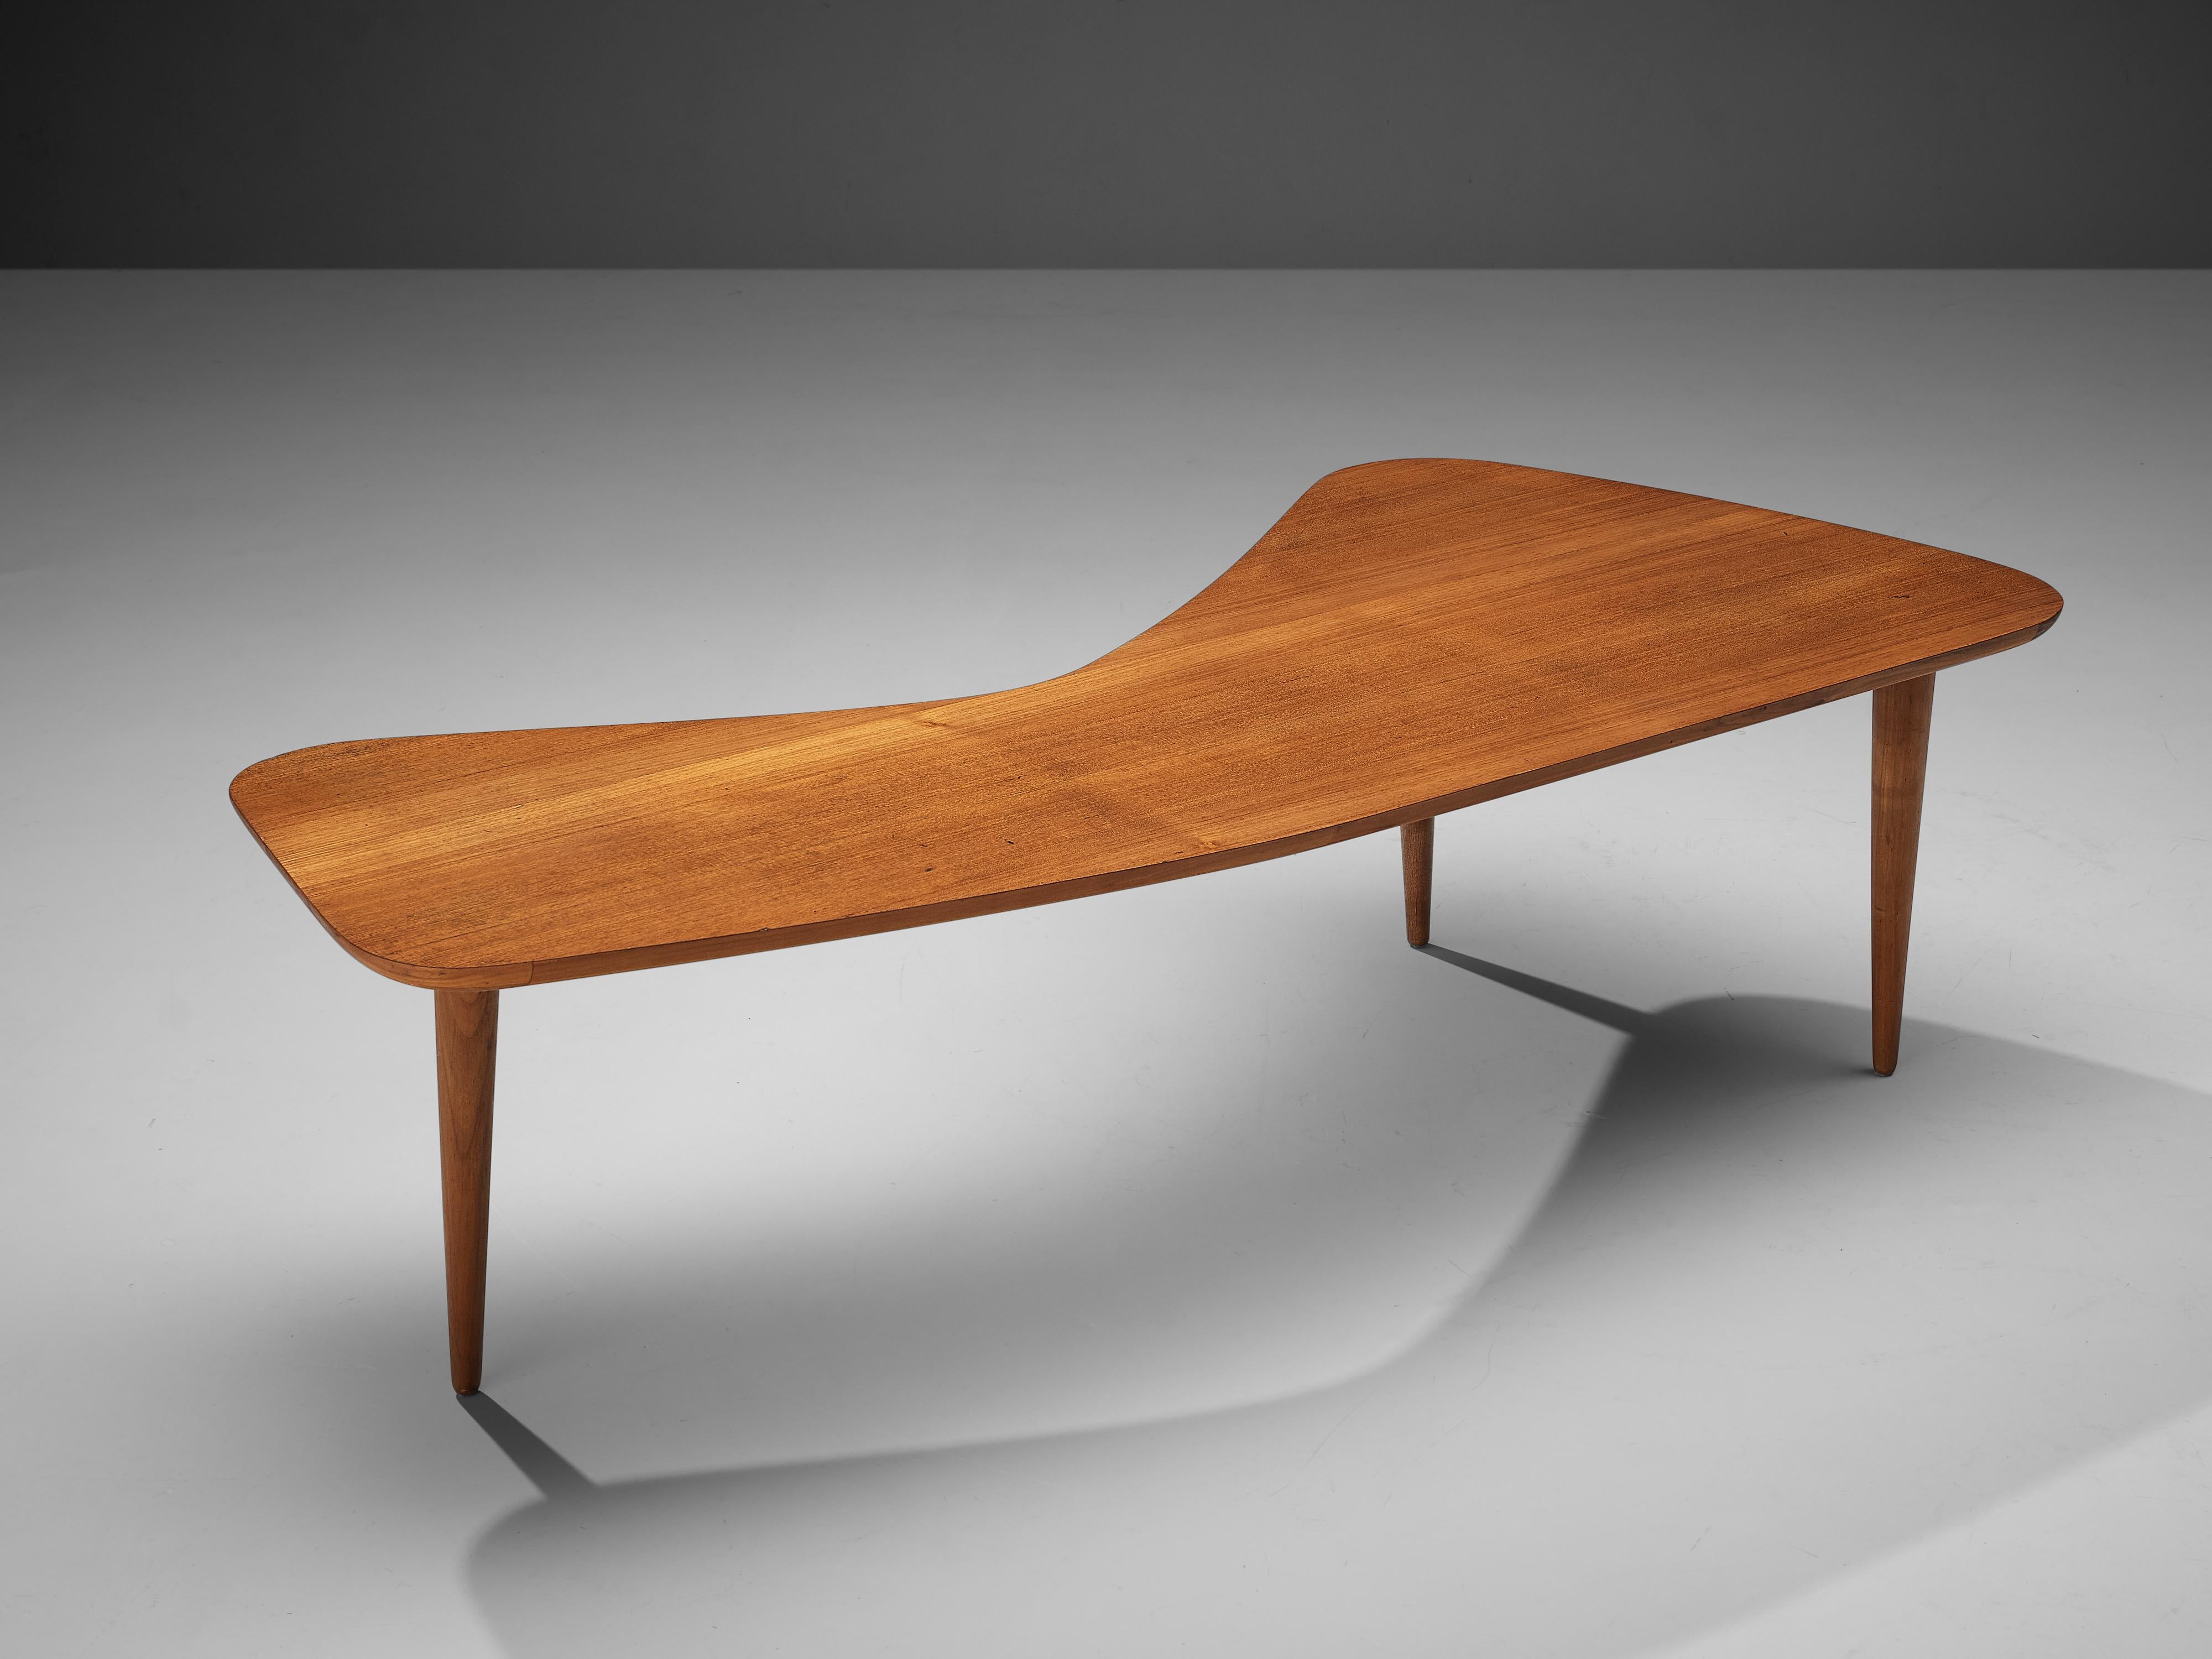 Taichiro Nakay for La Permanente Mobili Cantù, coffee table, teak veneer, wood, Japan/Italy, 1950s

Taichiro Nakai is an incredibly talented Japanese designer who is mostly known for his participation at the Selettiva del Mobili competition in